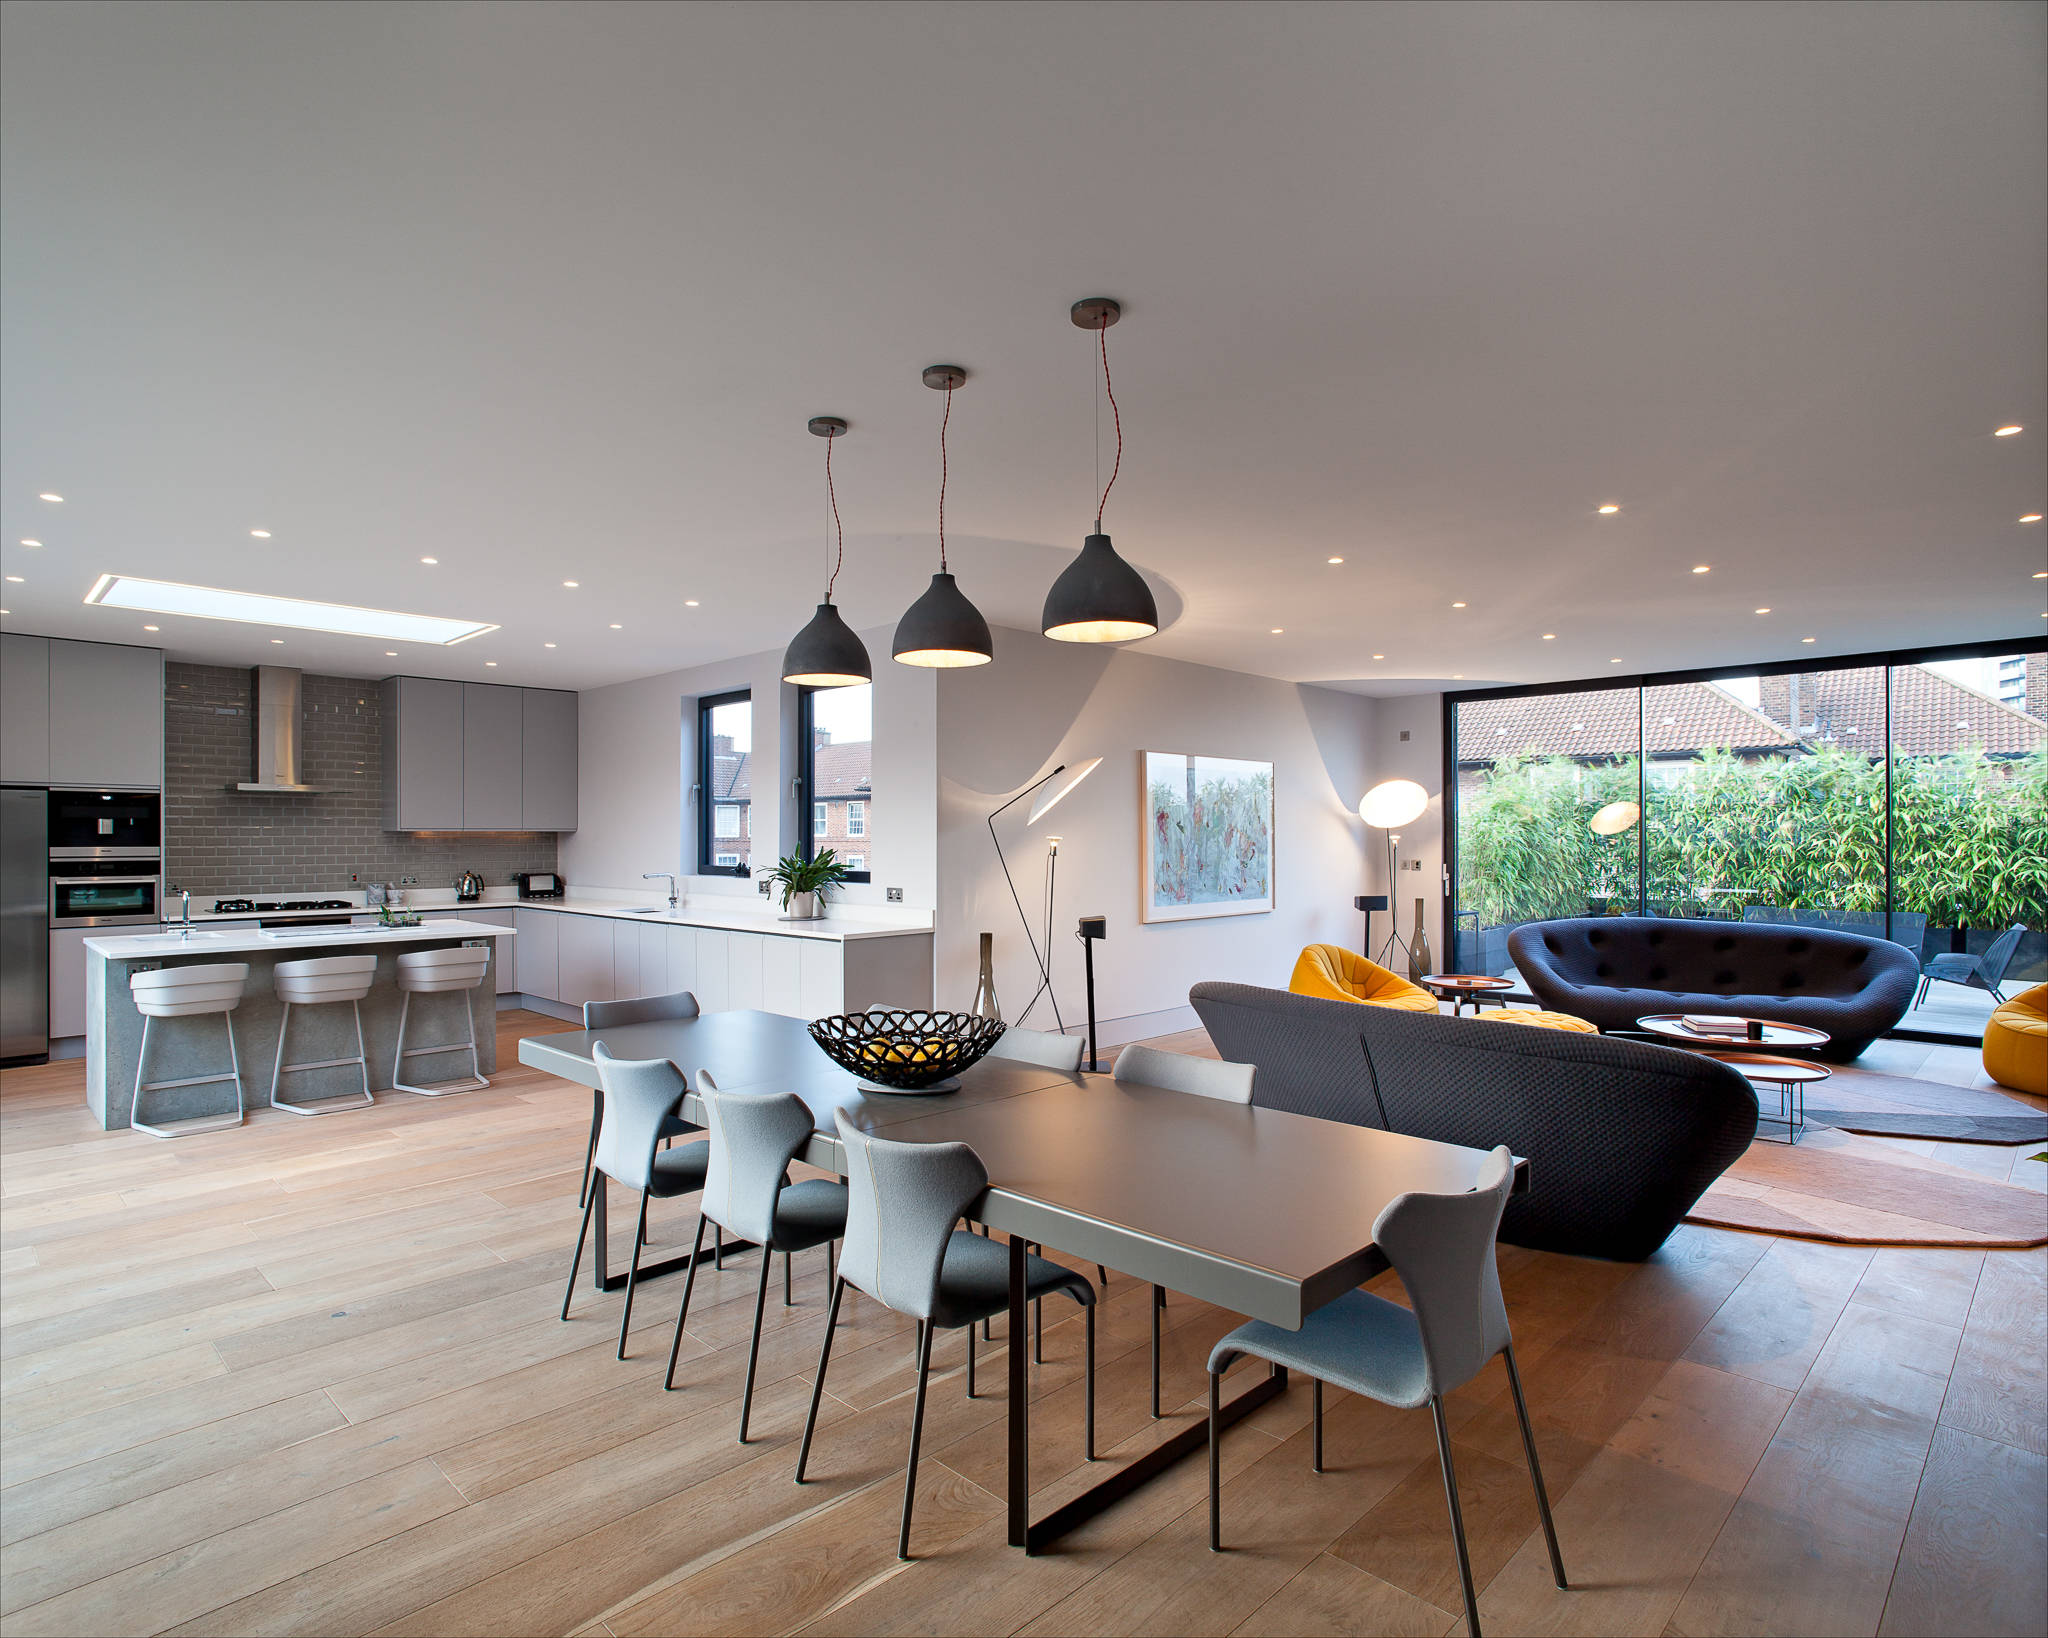 The Open Plan Kitchen Trend – Is it Over? | Houzz UK